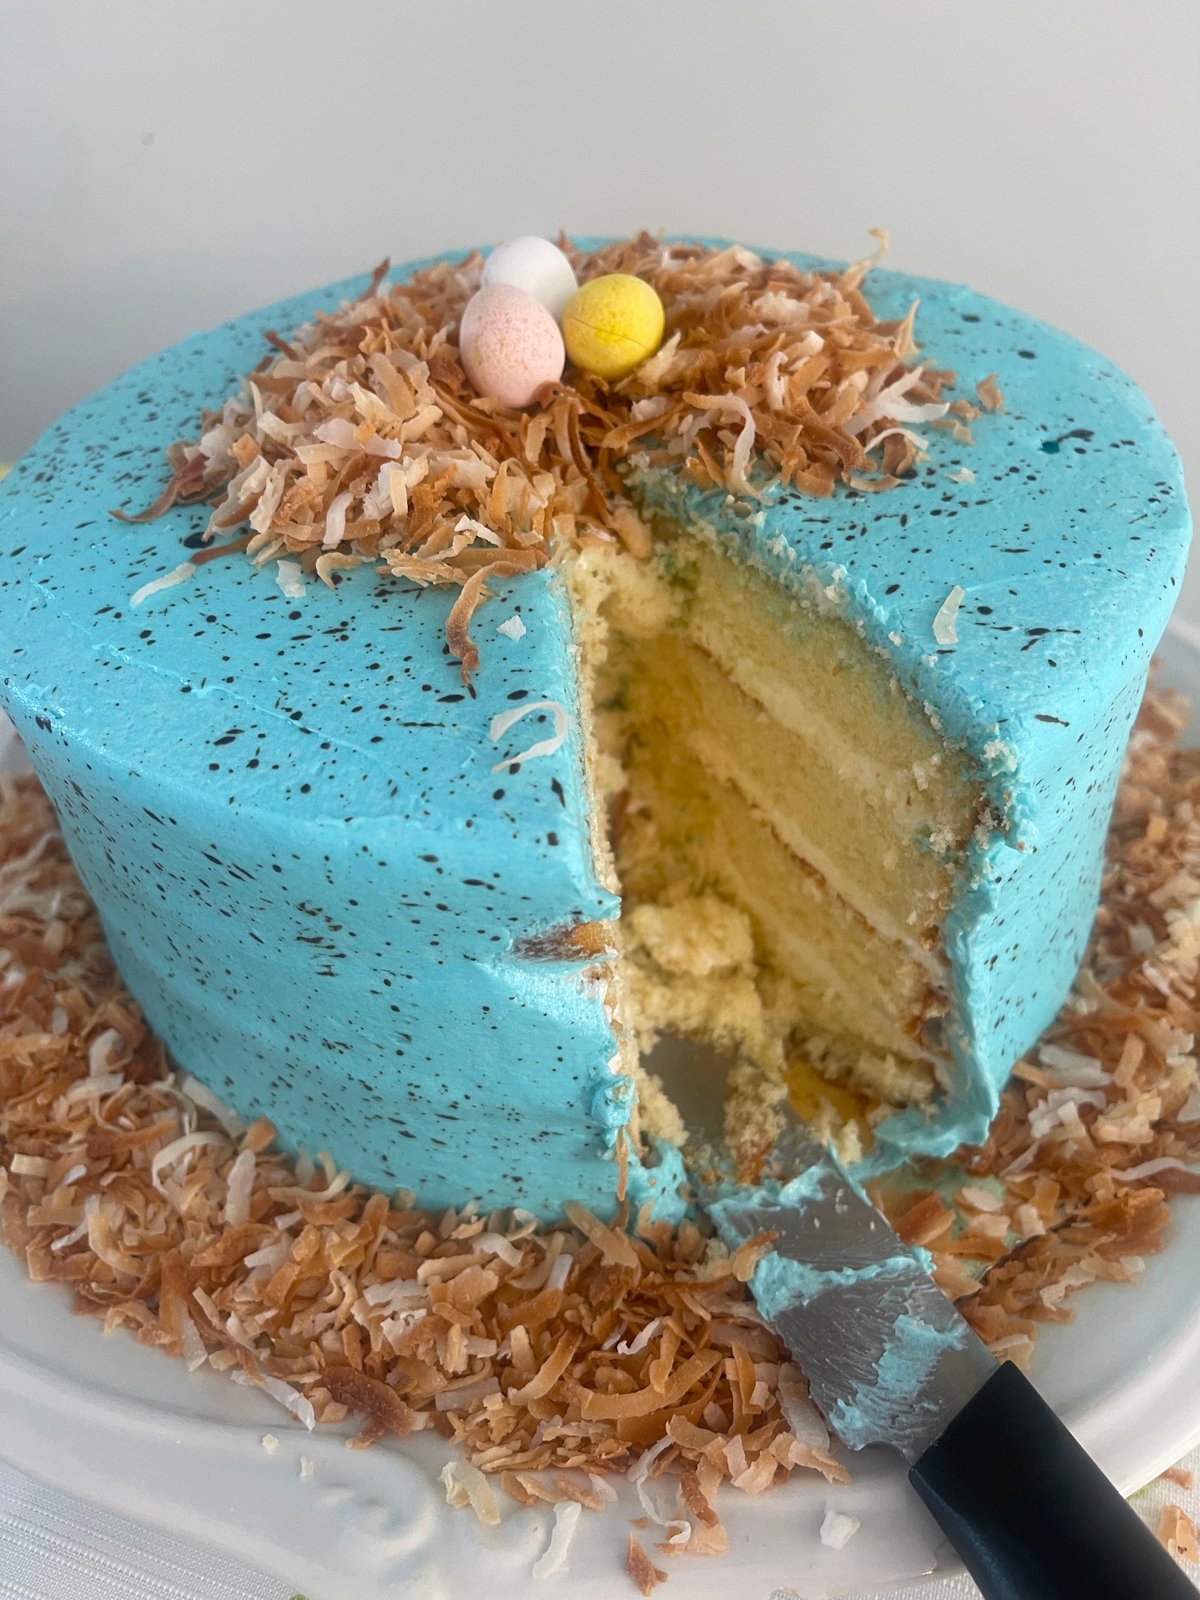 Sliced yellow cake decorated for Easter.